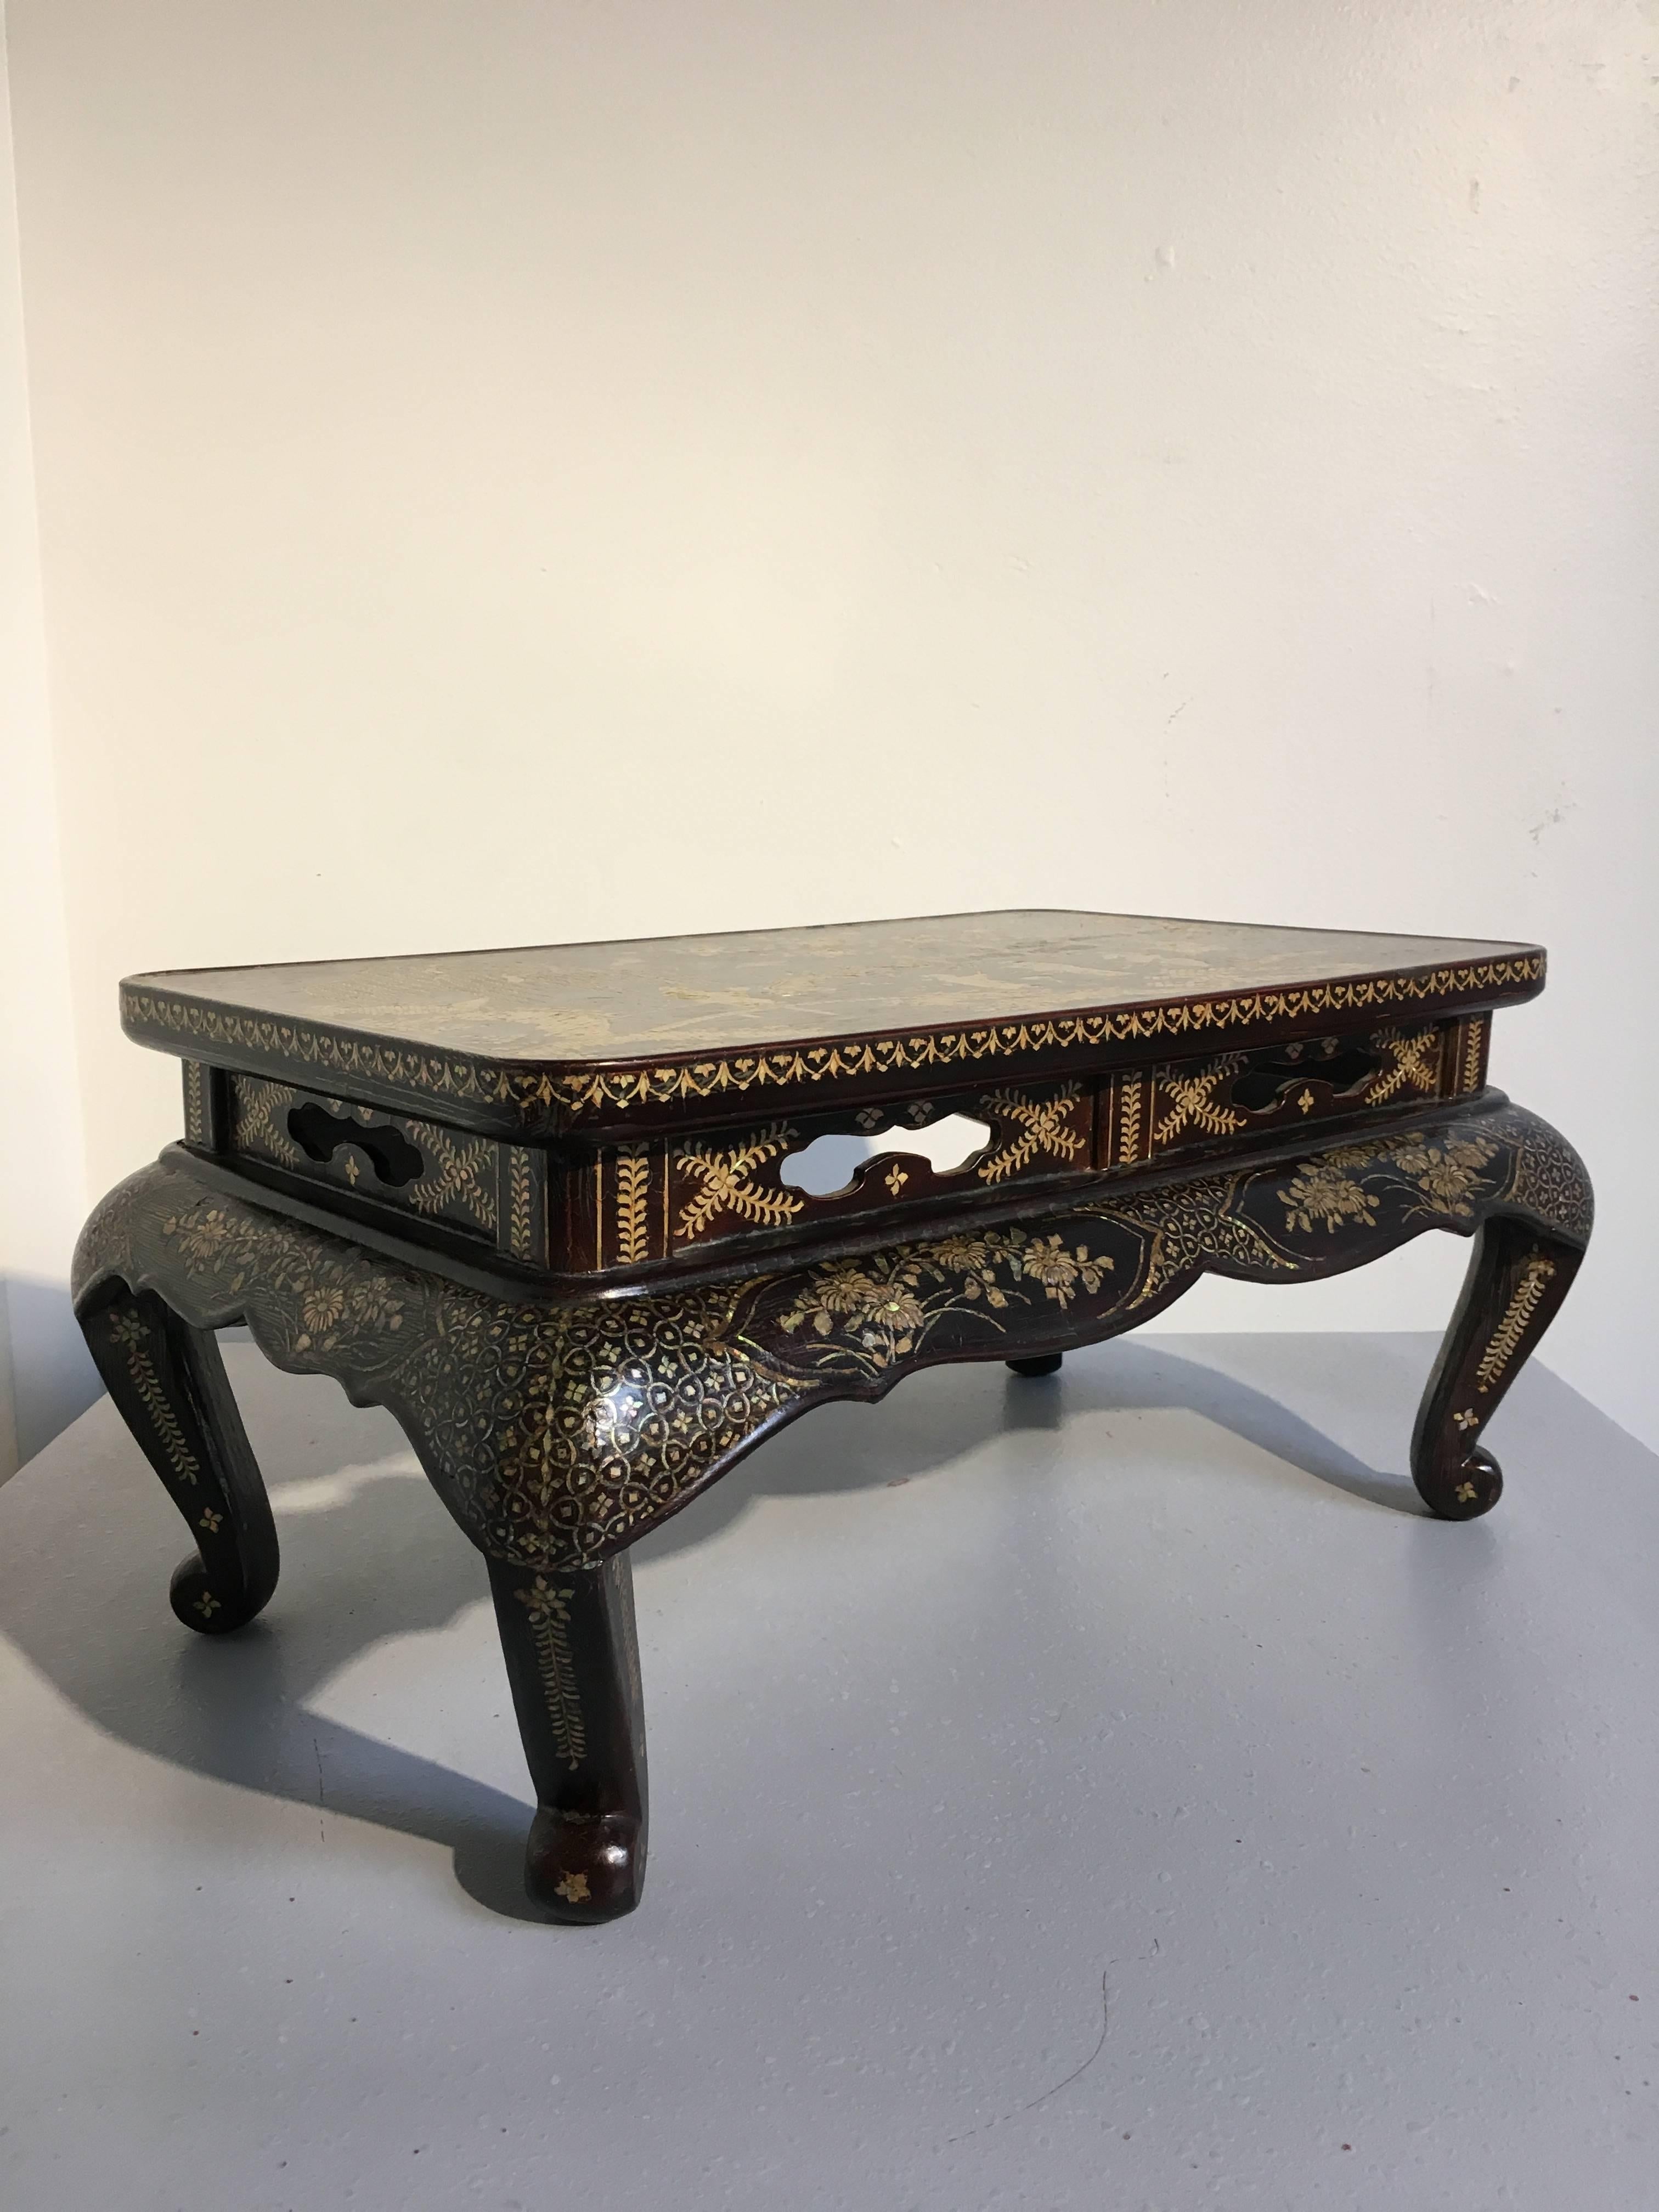 A stunning mid-Qing dynasty Chinese lacquer and mother-of-pearl inlaid small table, originally used as a scholar's display stand or incense table.
The top of the table inlaid with mother-of-pearl to depict a landscape scene of scholars in an ornate